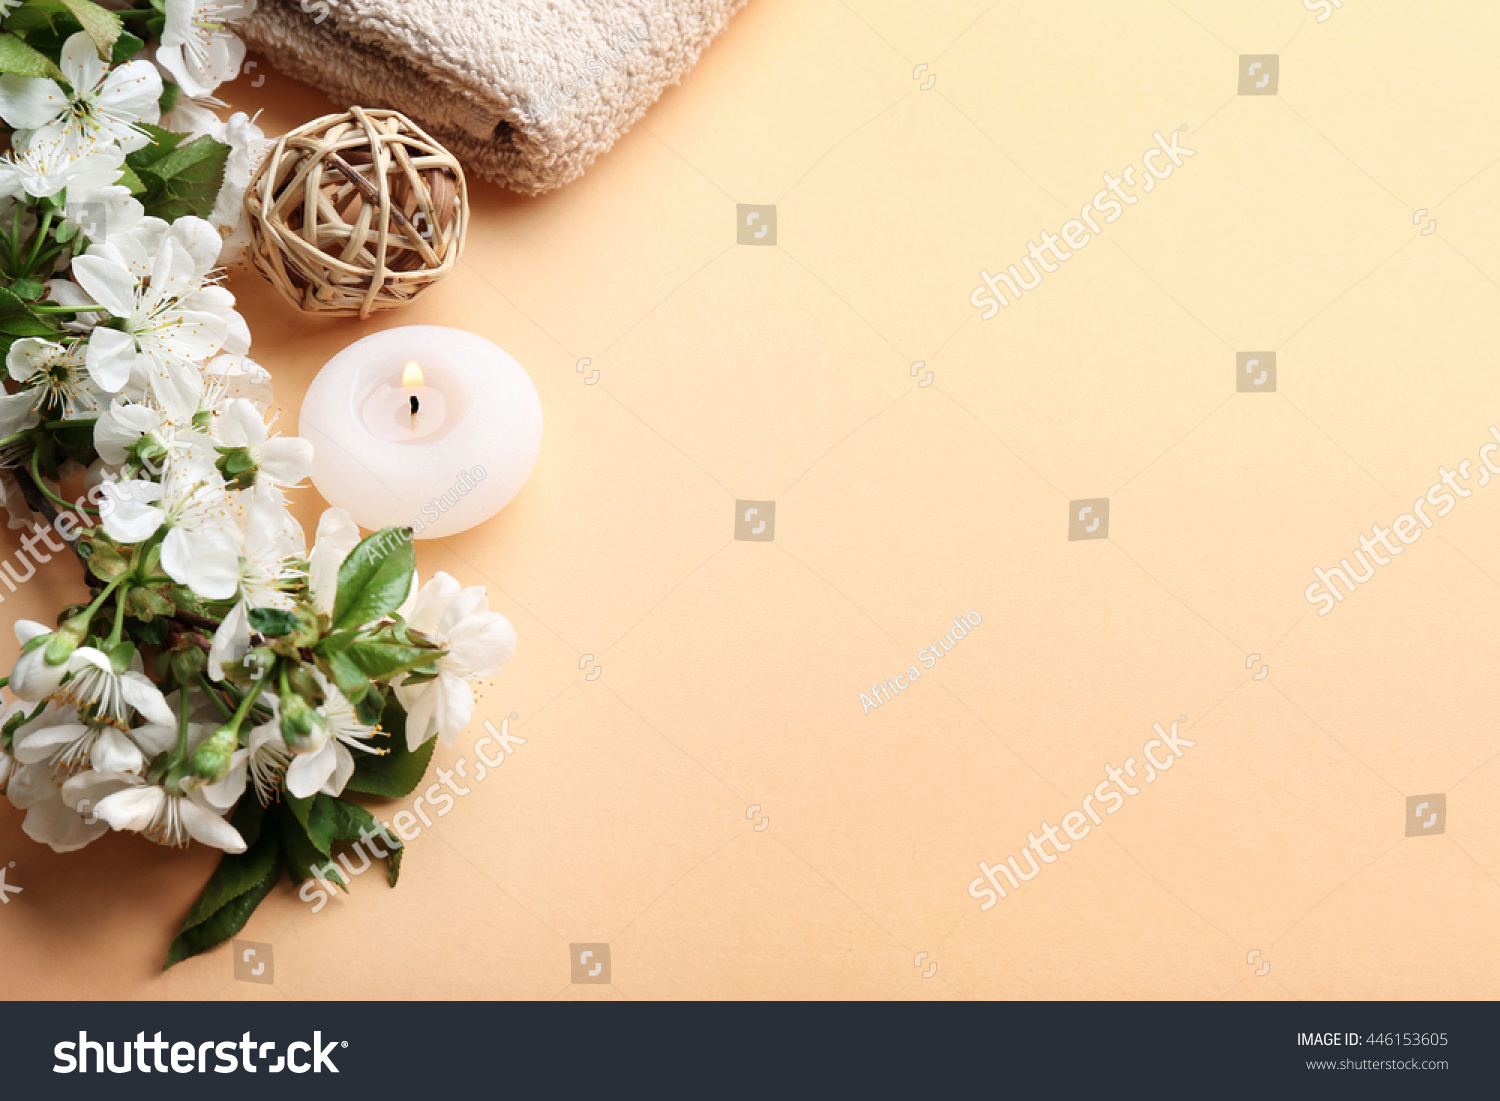 Spa treatment with blooming branch on beige background #446153605